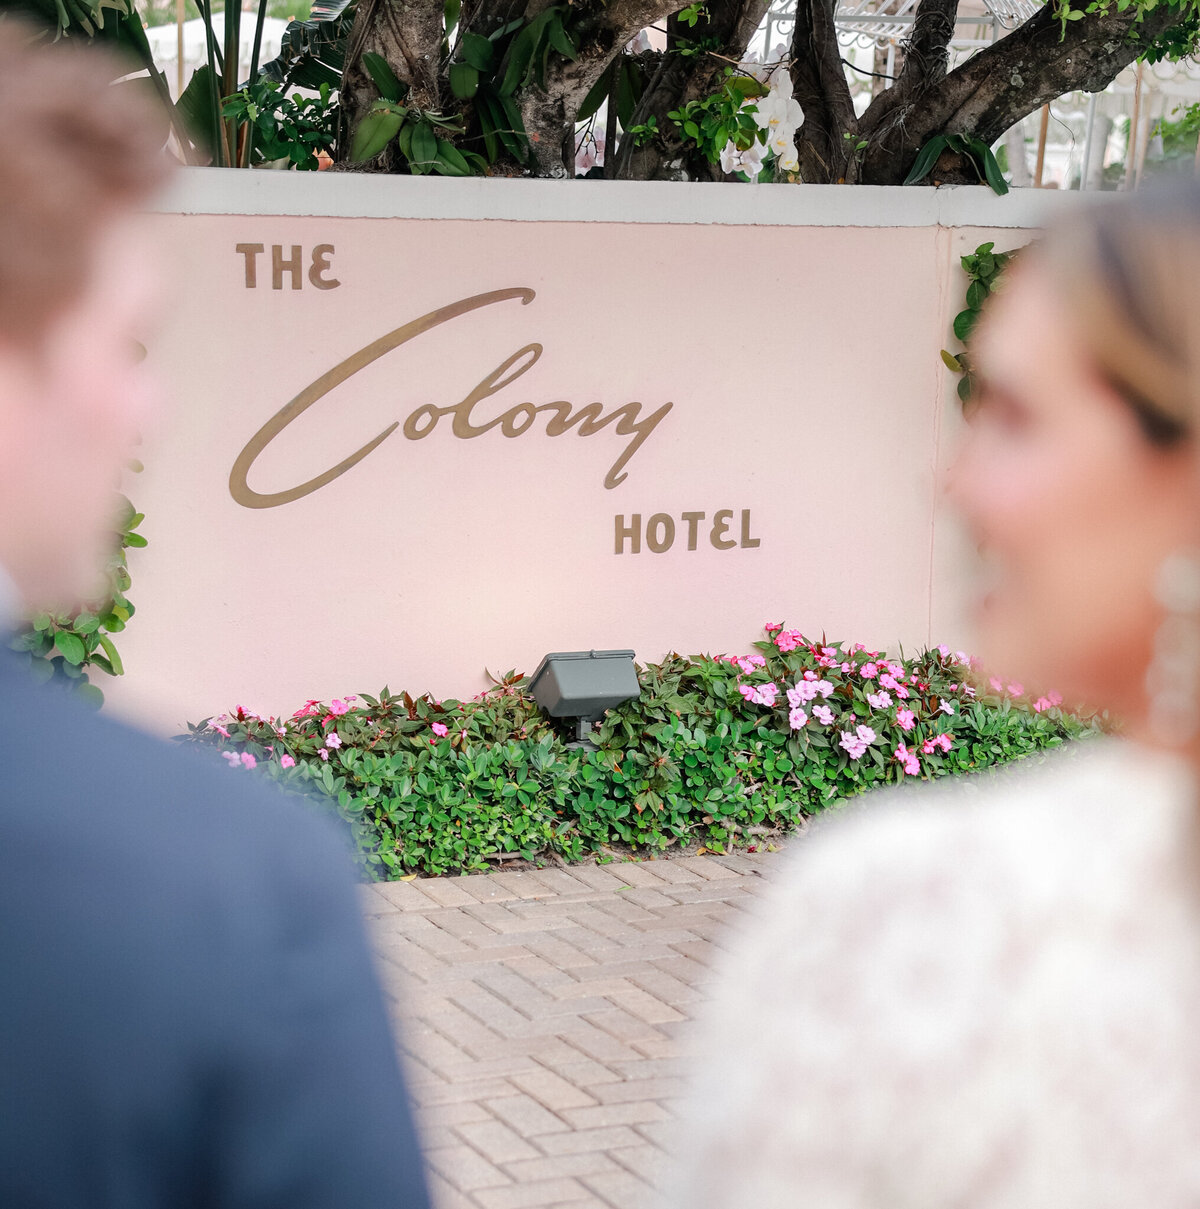 Palm Beach Wedding Photographer- Palm Beach Engagement Session- Worth Ave- The Colony Hotel- Zimmermann Fashion Shoot-59